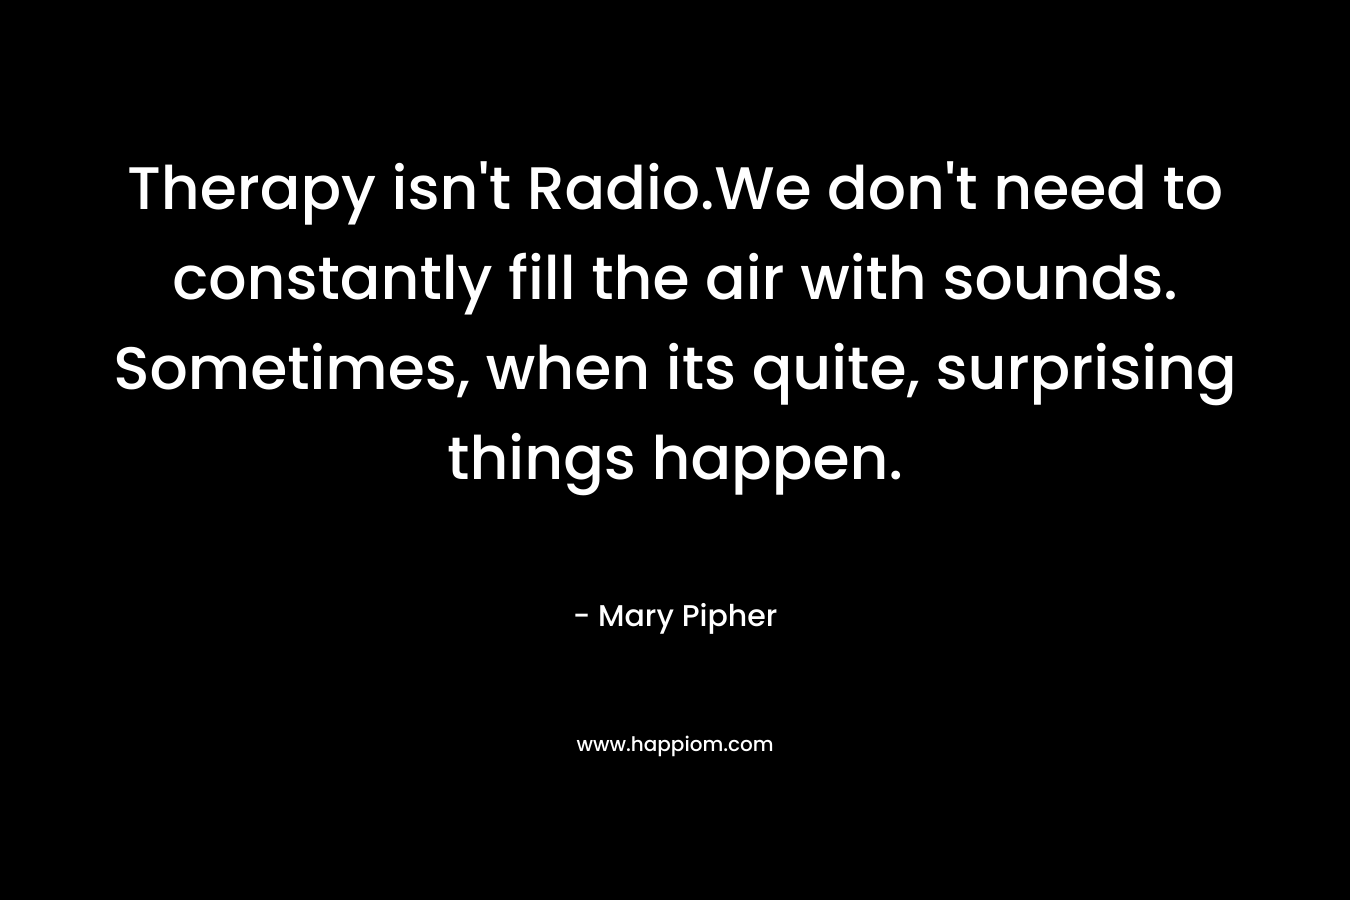 Therapy isn't Radio.We don't need to constantly fill the air with sounds. Sometimes, when its quite, surprising things happen.